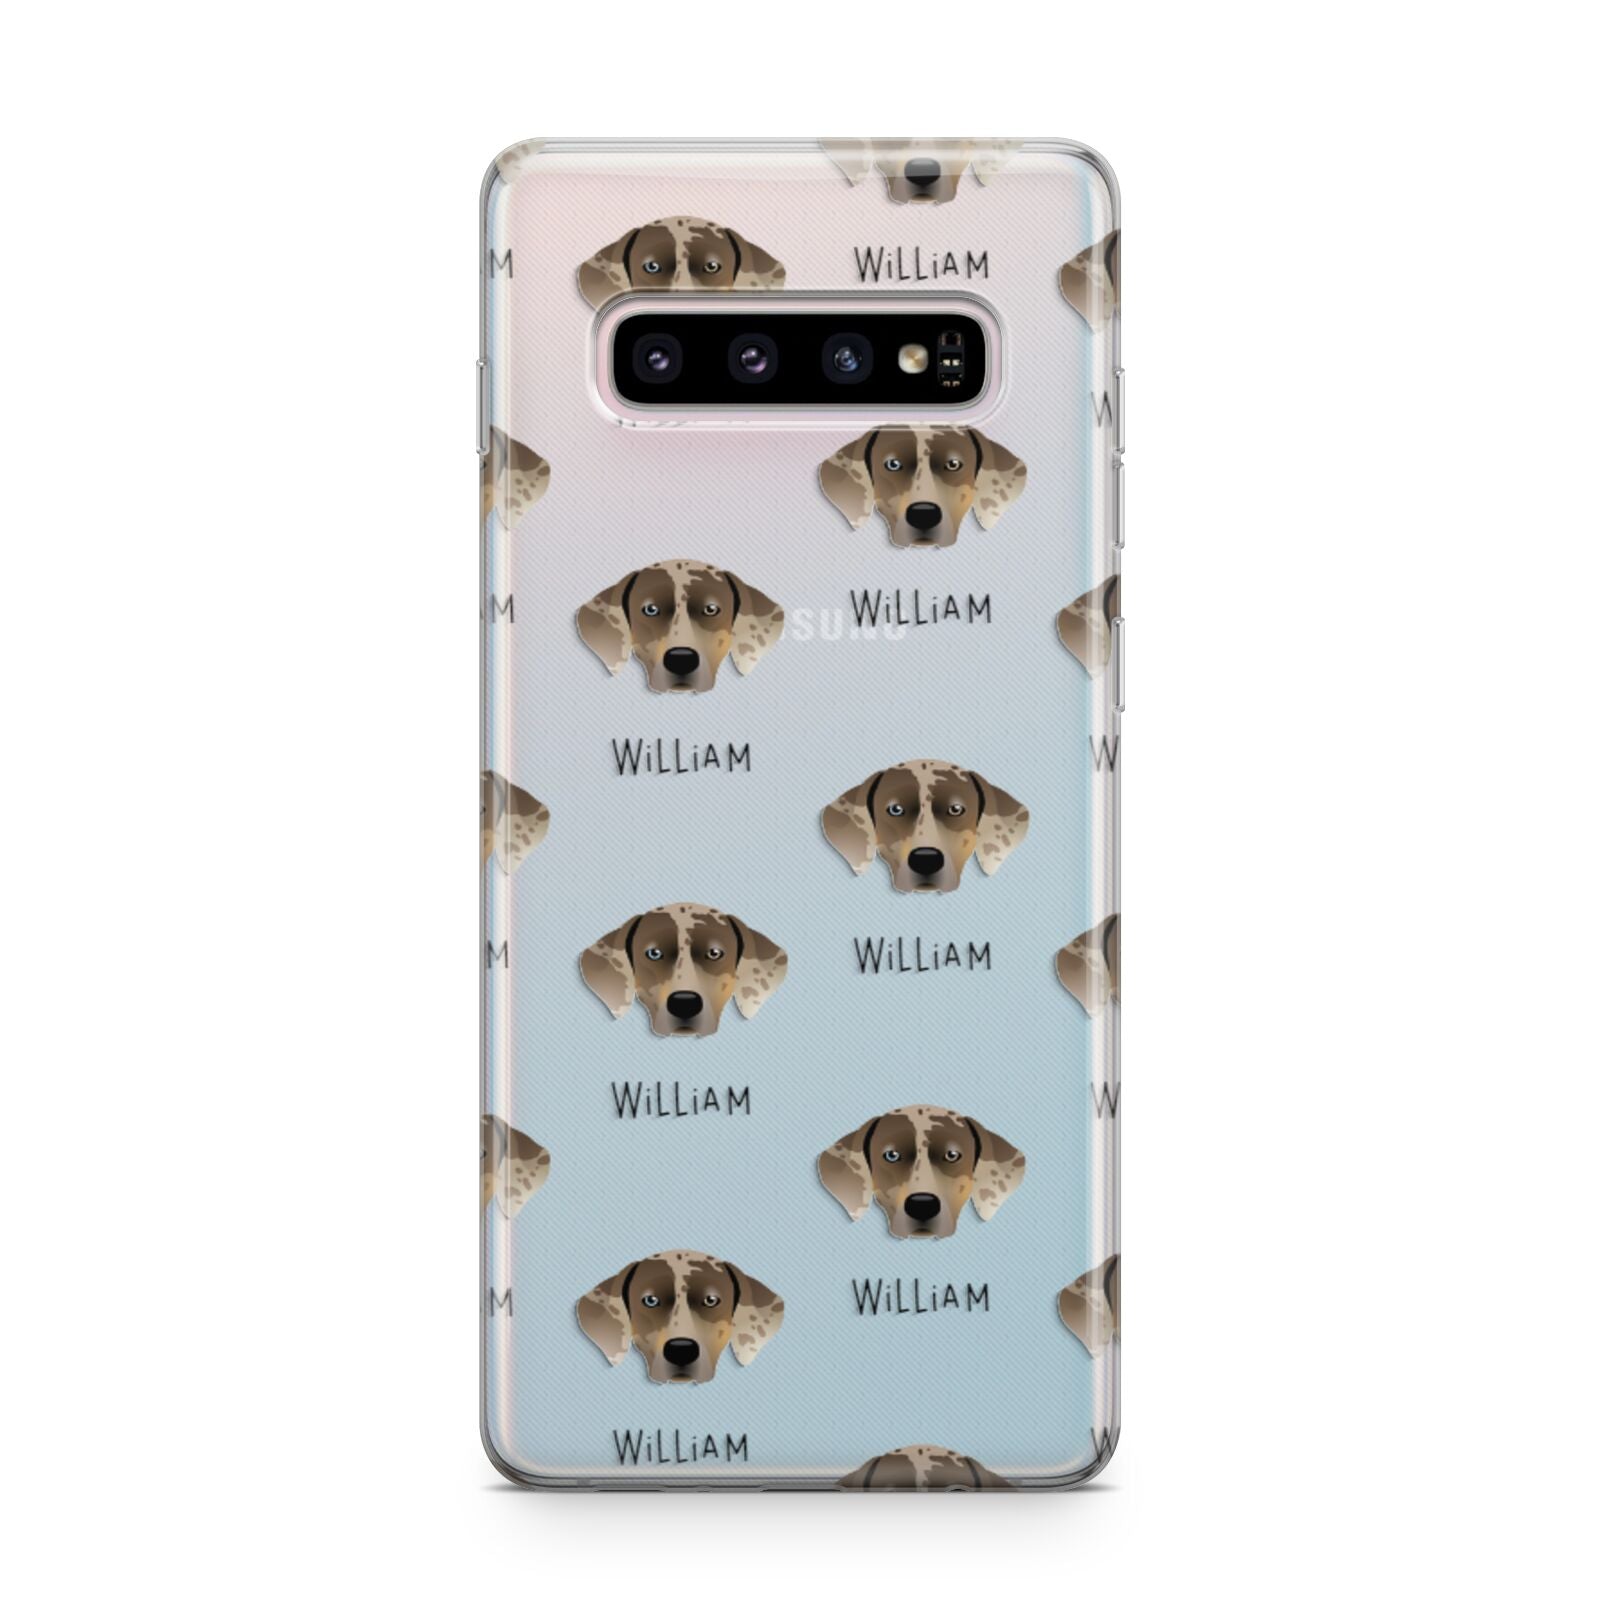 Catahoula Leopard Dog Icon with Name Samsung Galaxy S10 Plus Case